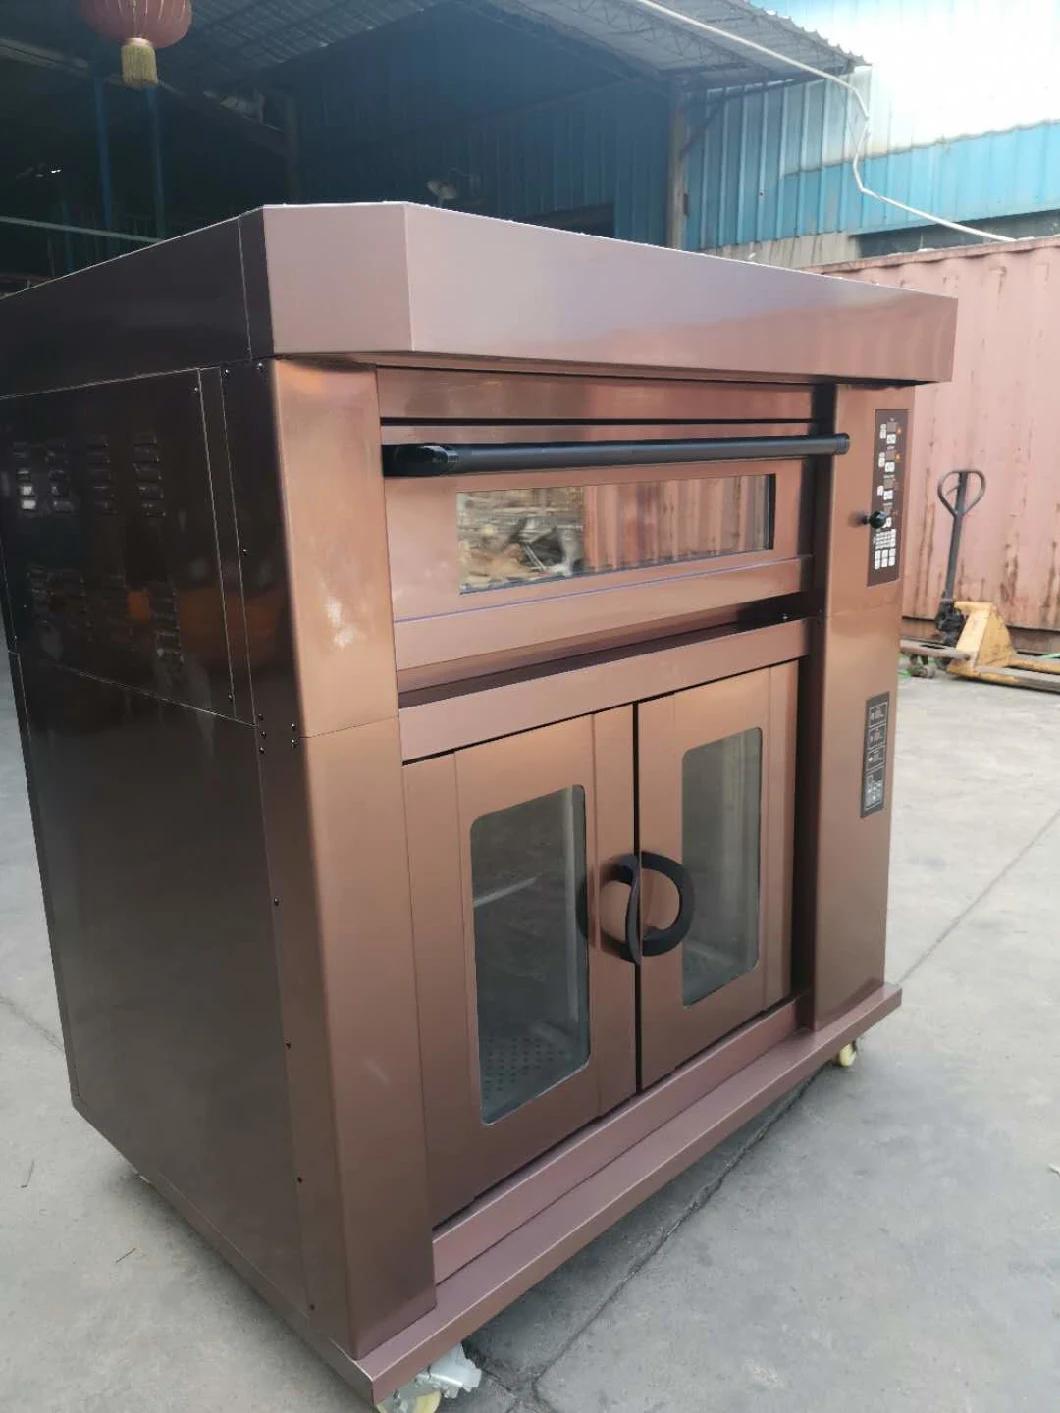 Luxury Bakery Workshop Commercial Bakery Equipment Electric Convection Oven with Proofer